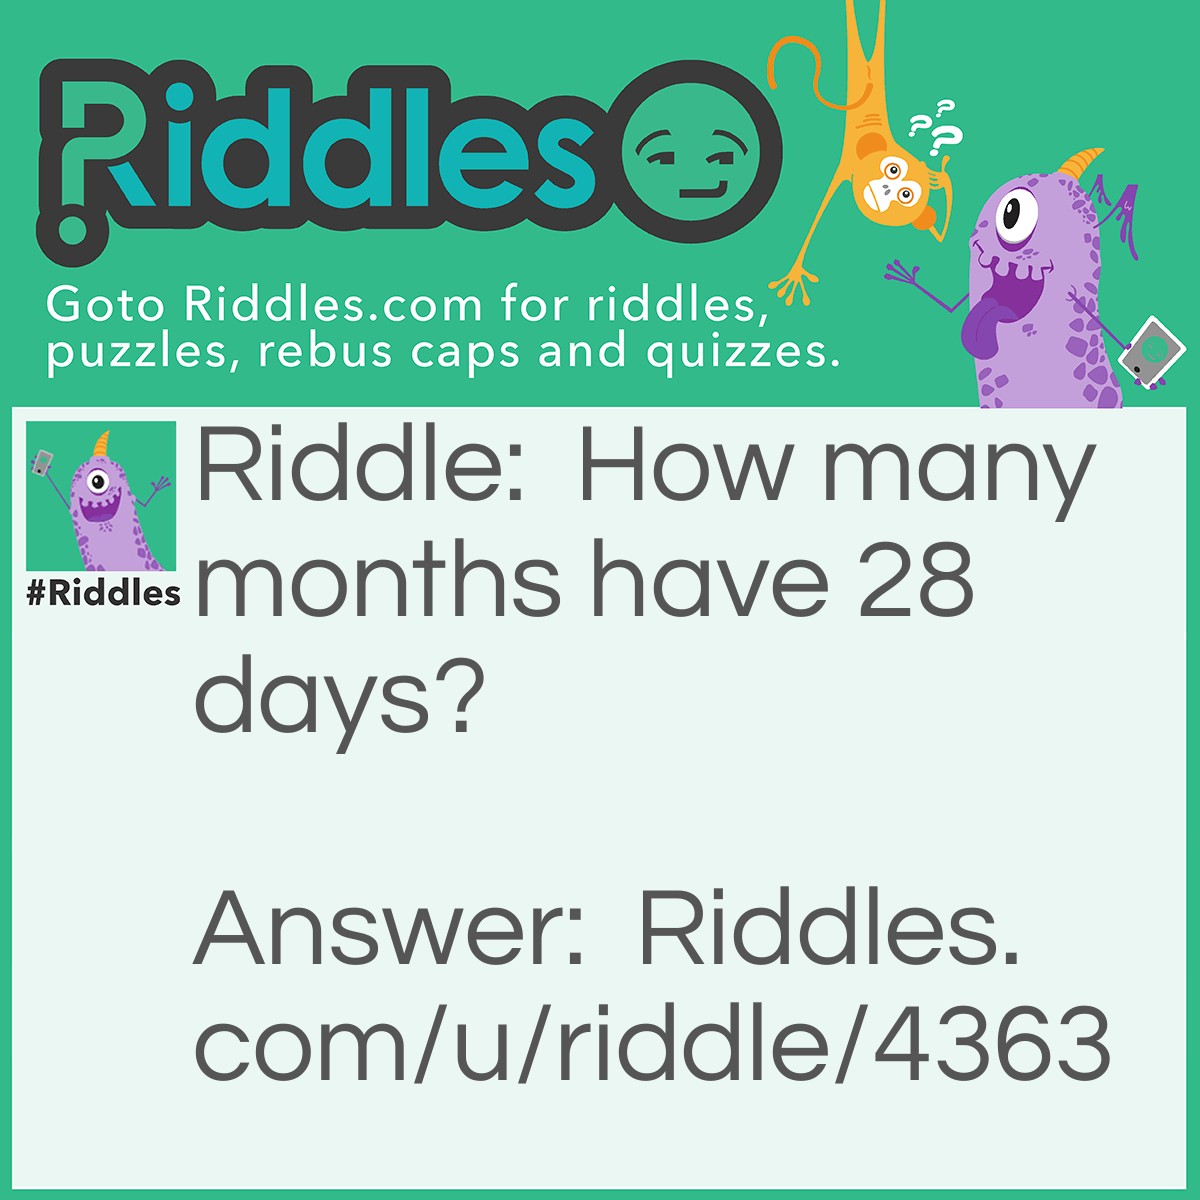 Riddle: How many months have 28 days? Answer: All months have 28 days, I never said end in 28 days...